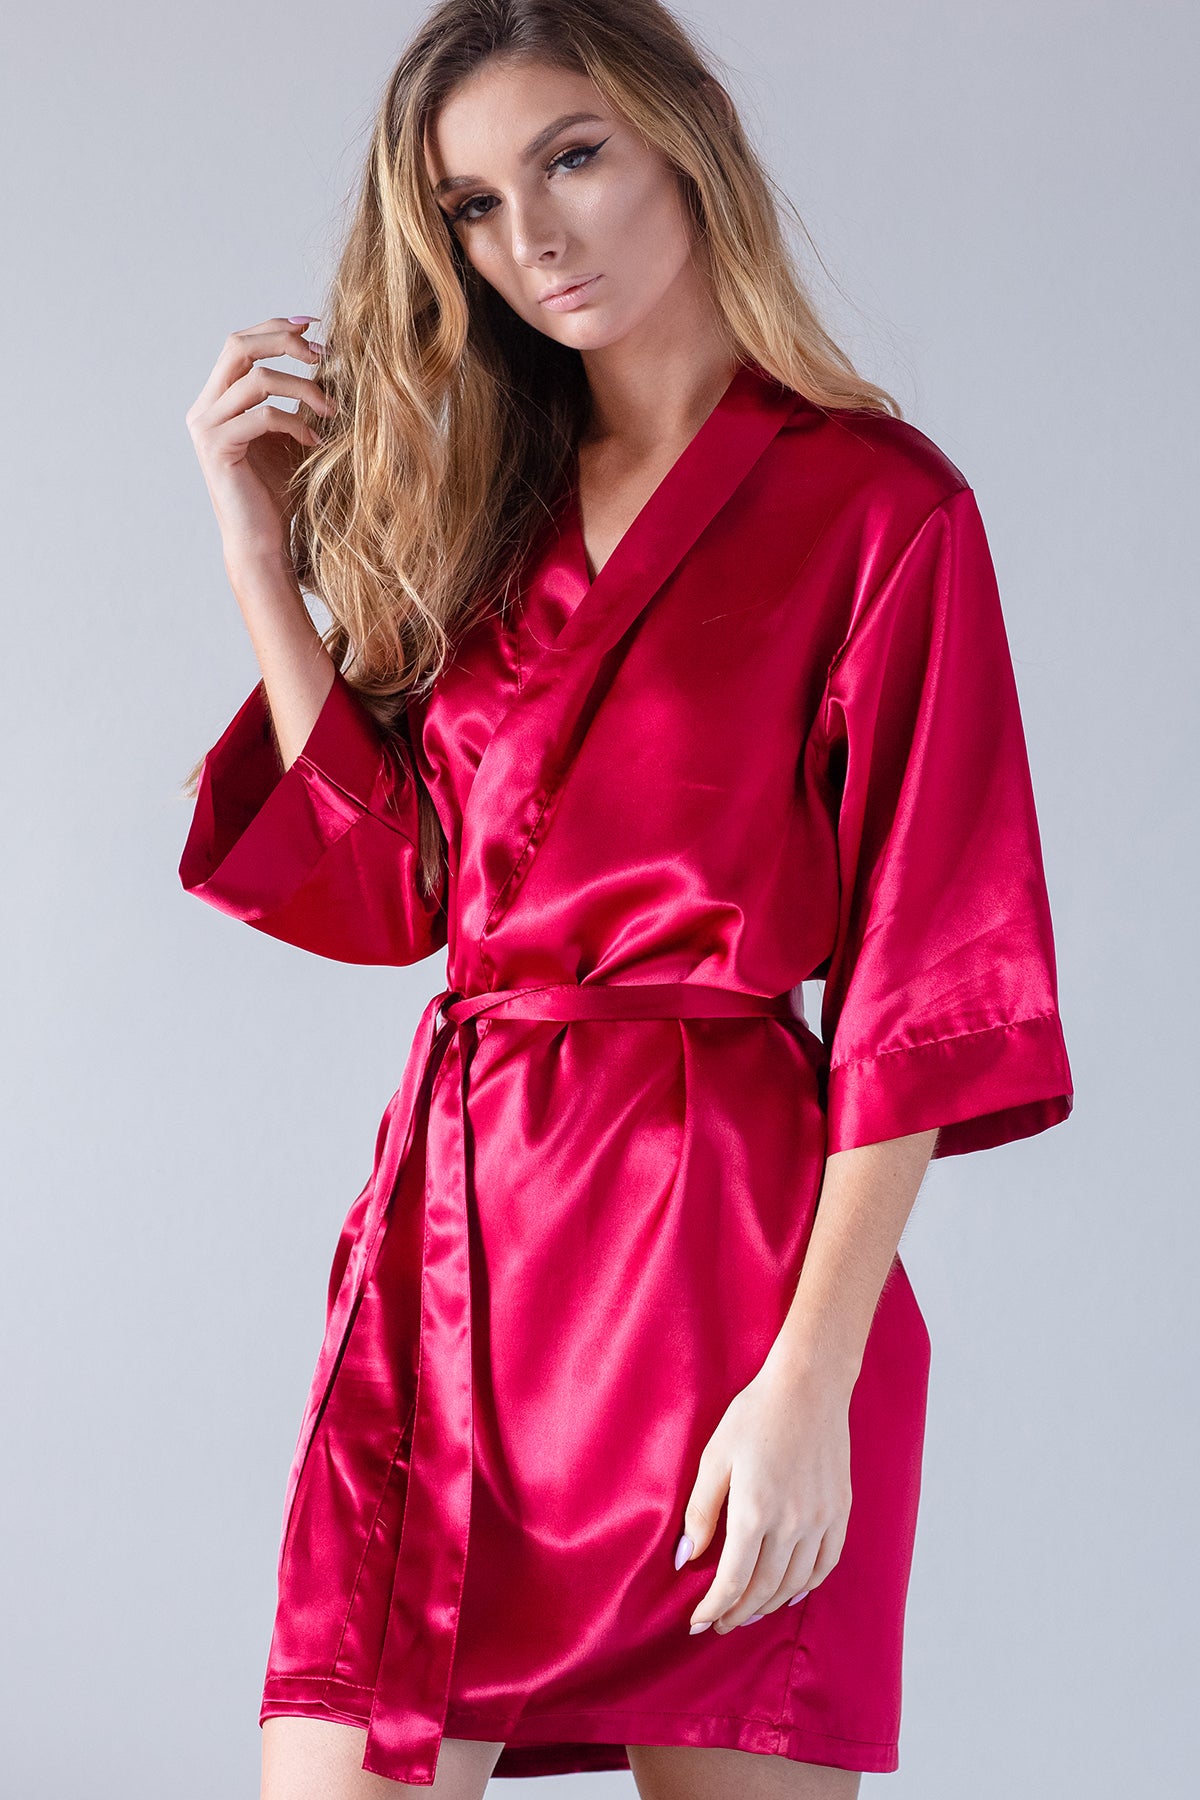 red satin nightgown